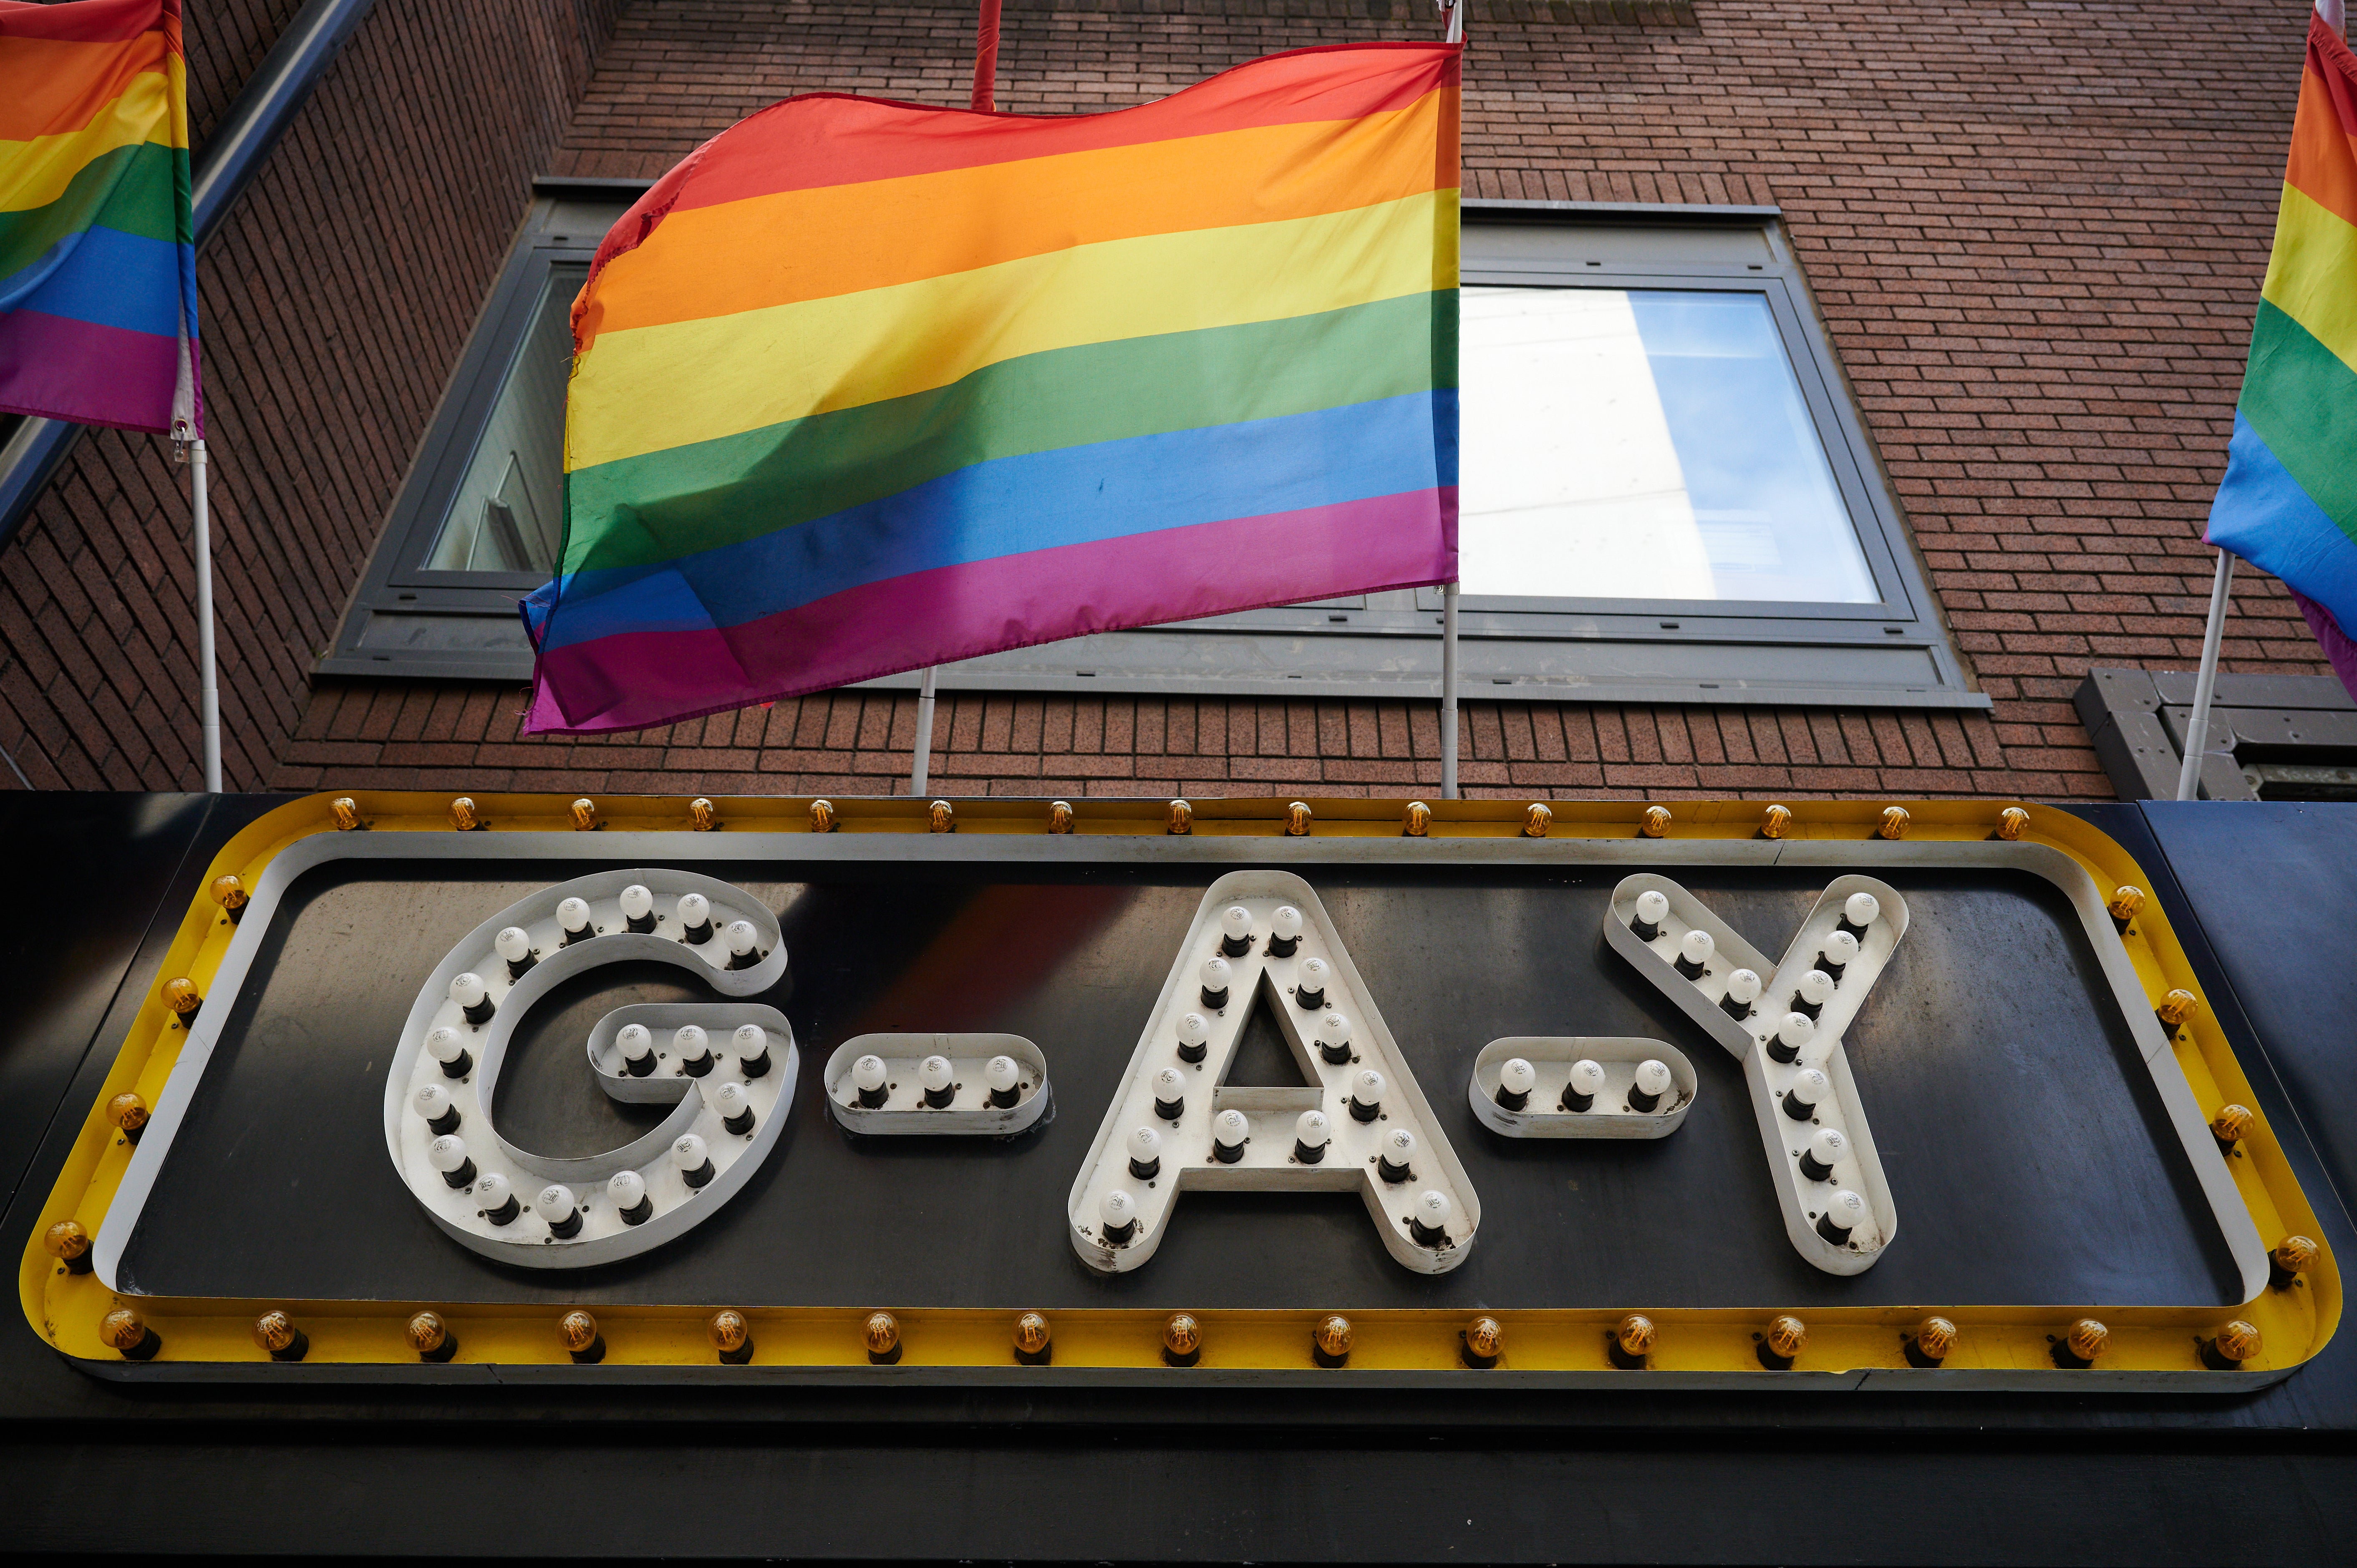 The owner of G-A-Y says the government has failed to provide evidence to back up its curfew policy